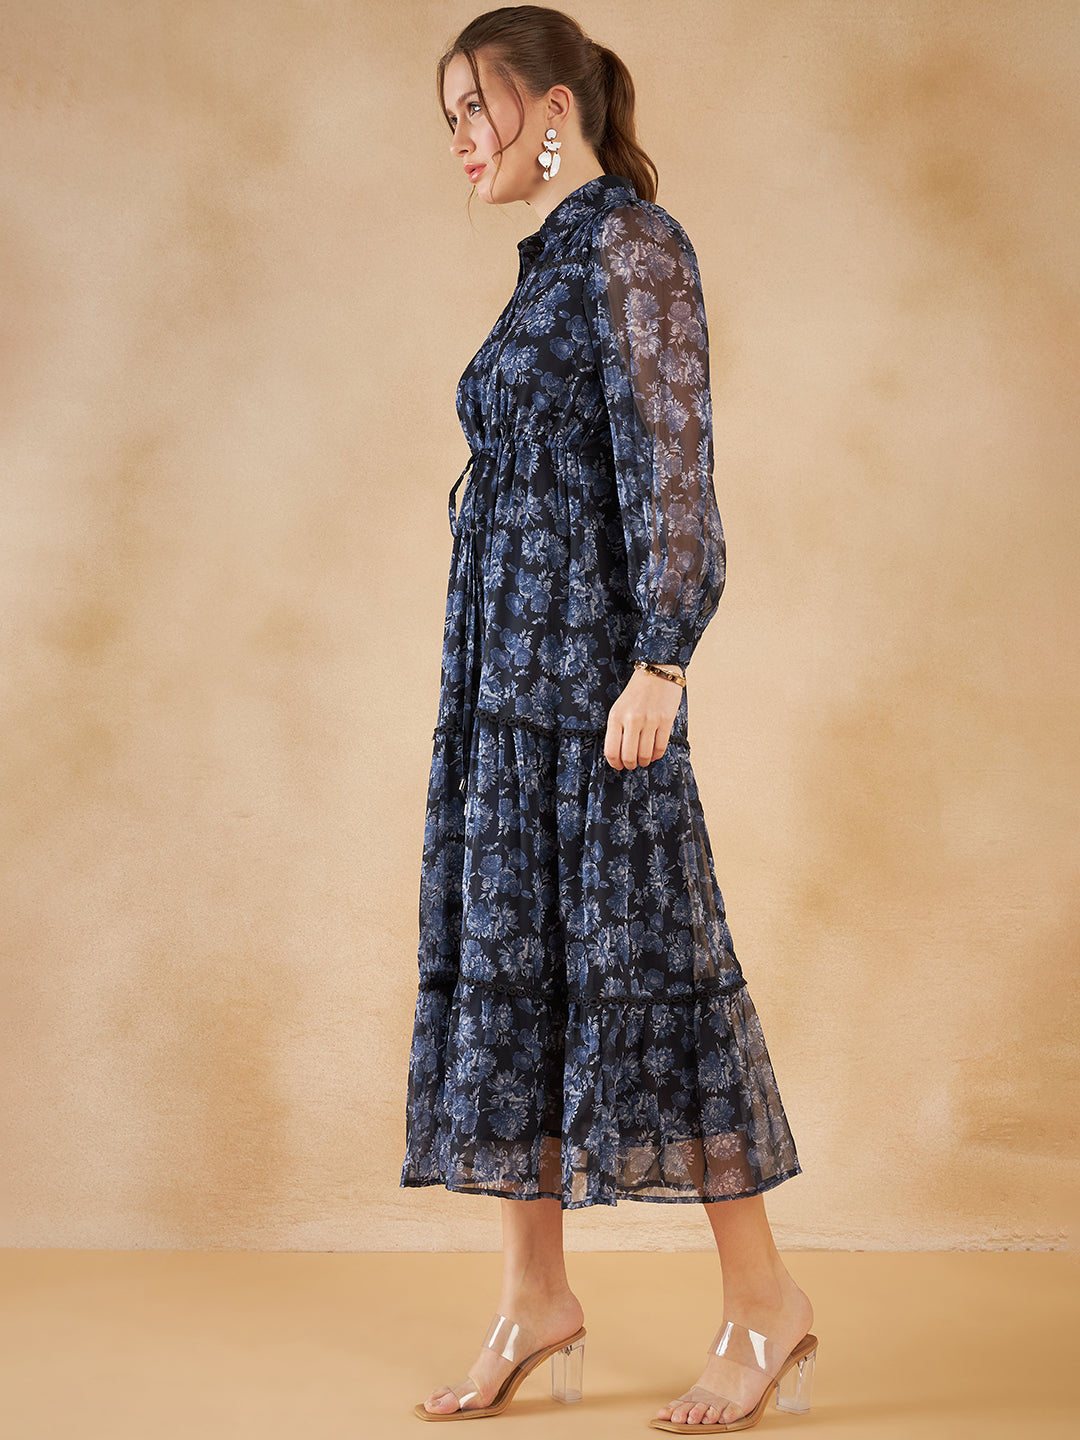 Navy Floral Printed Lace Detail  Tiered Maxi Shirt Dress